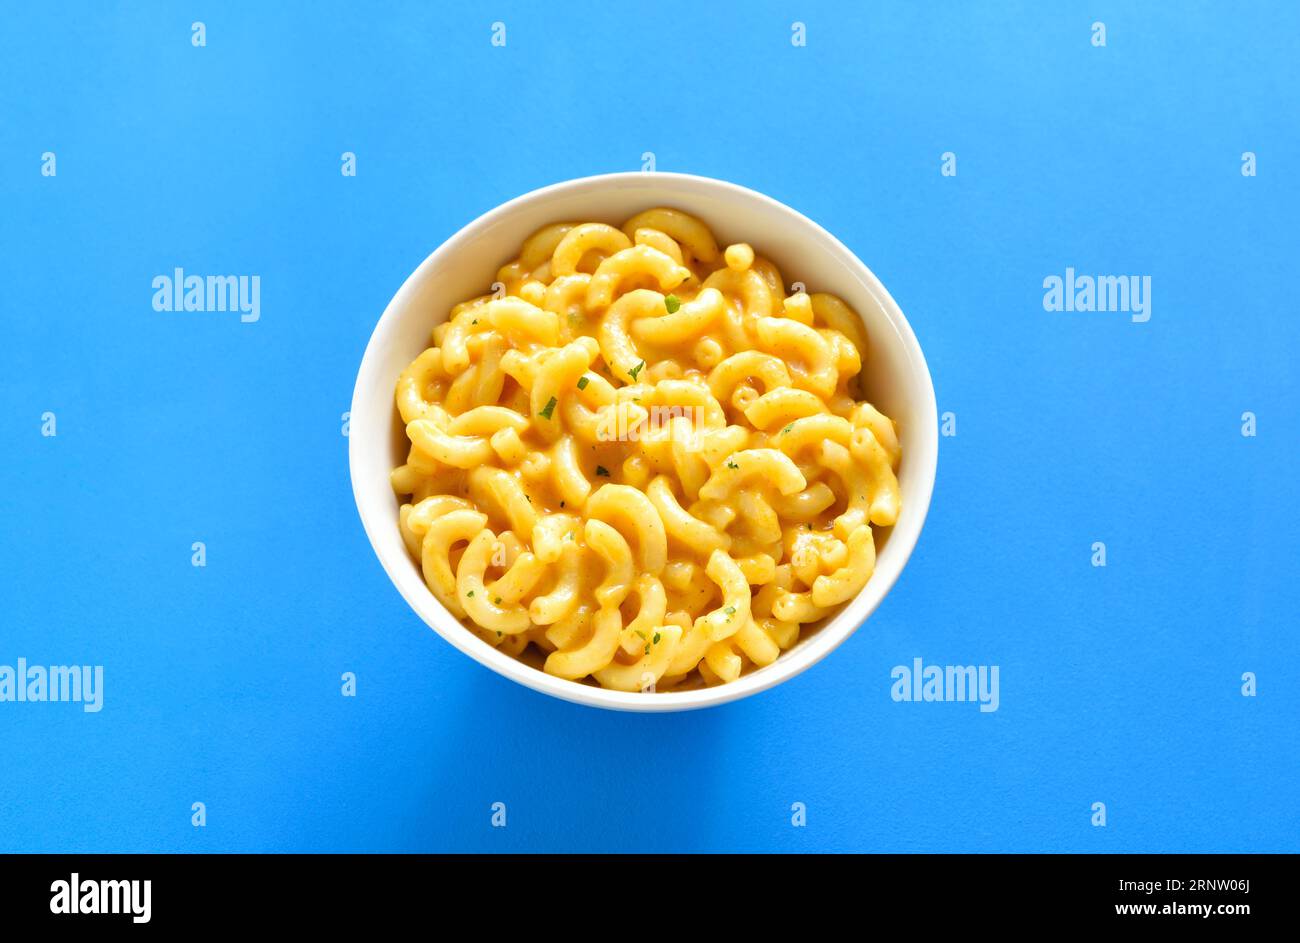 Macaroni and cheese in bowl over blue background. Close up view Stock Photo